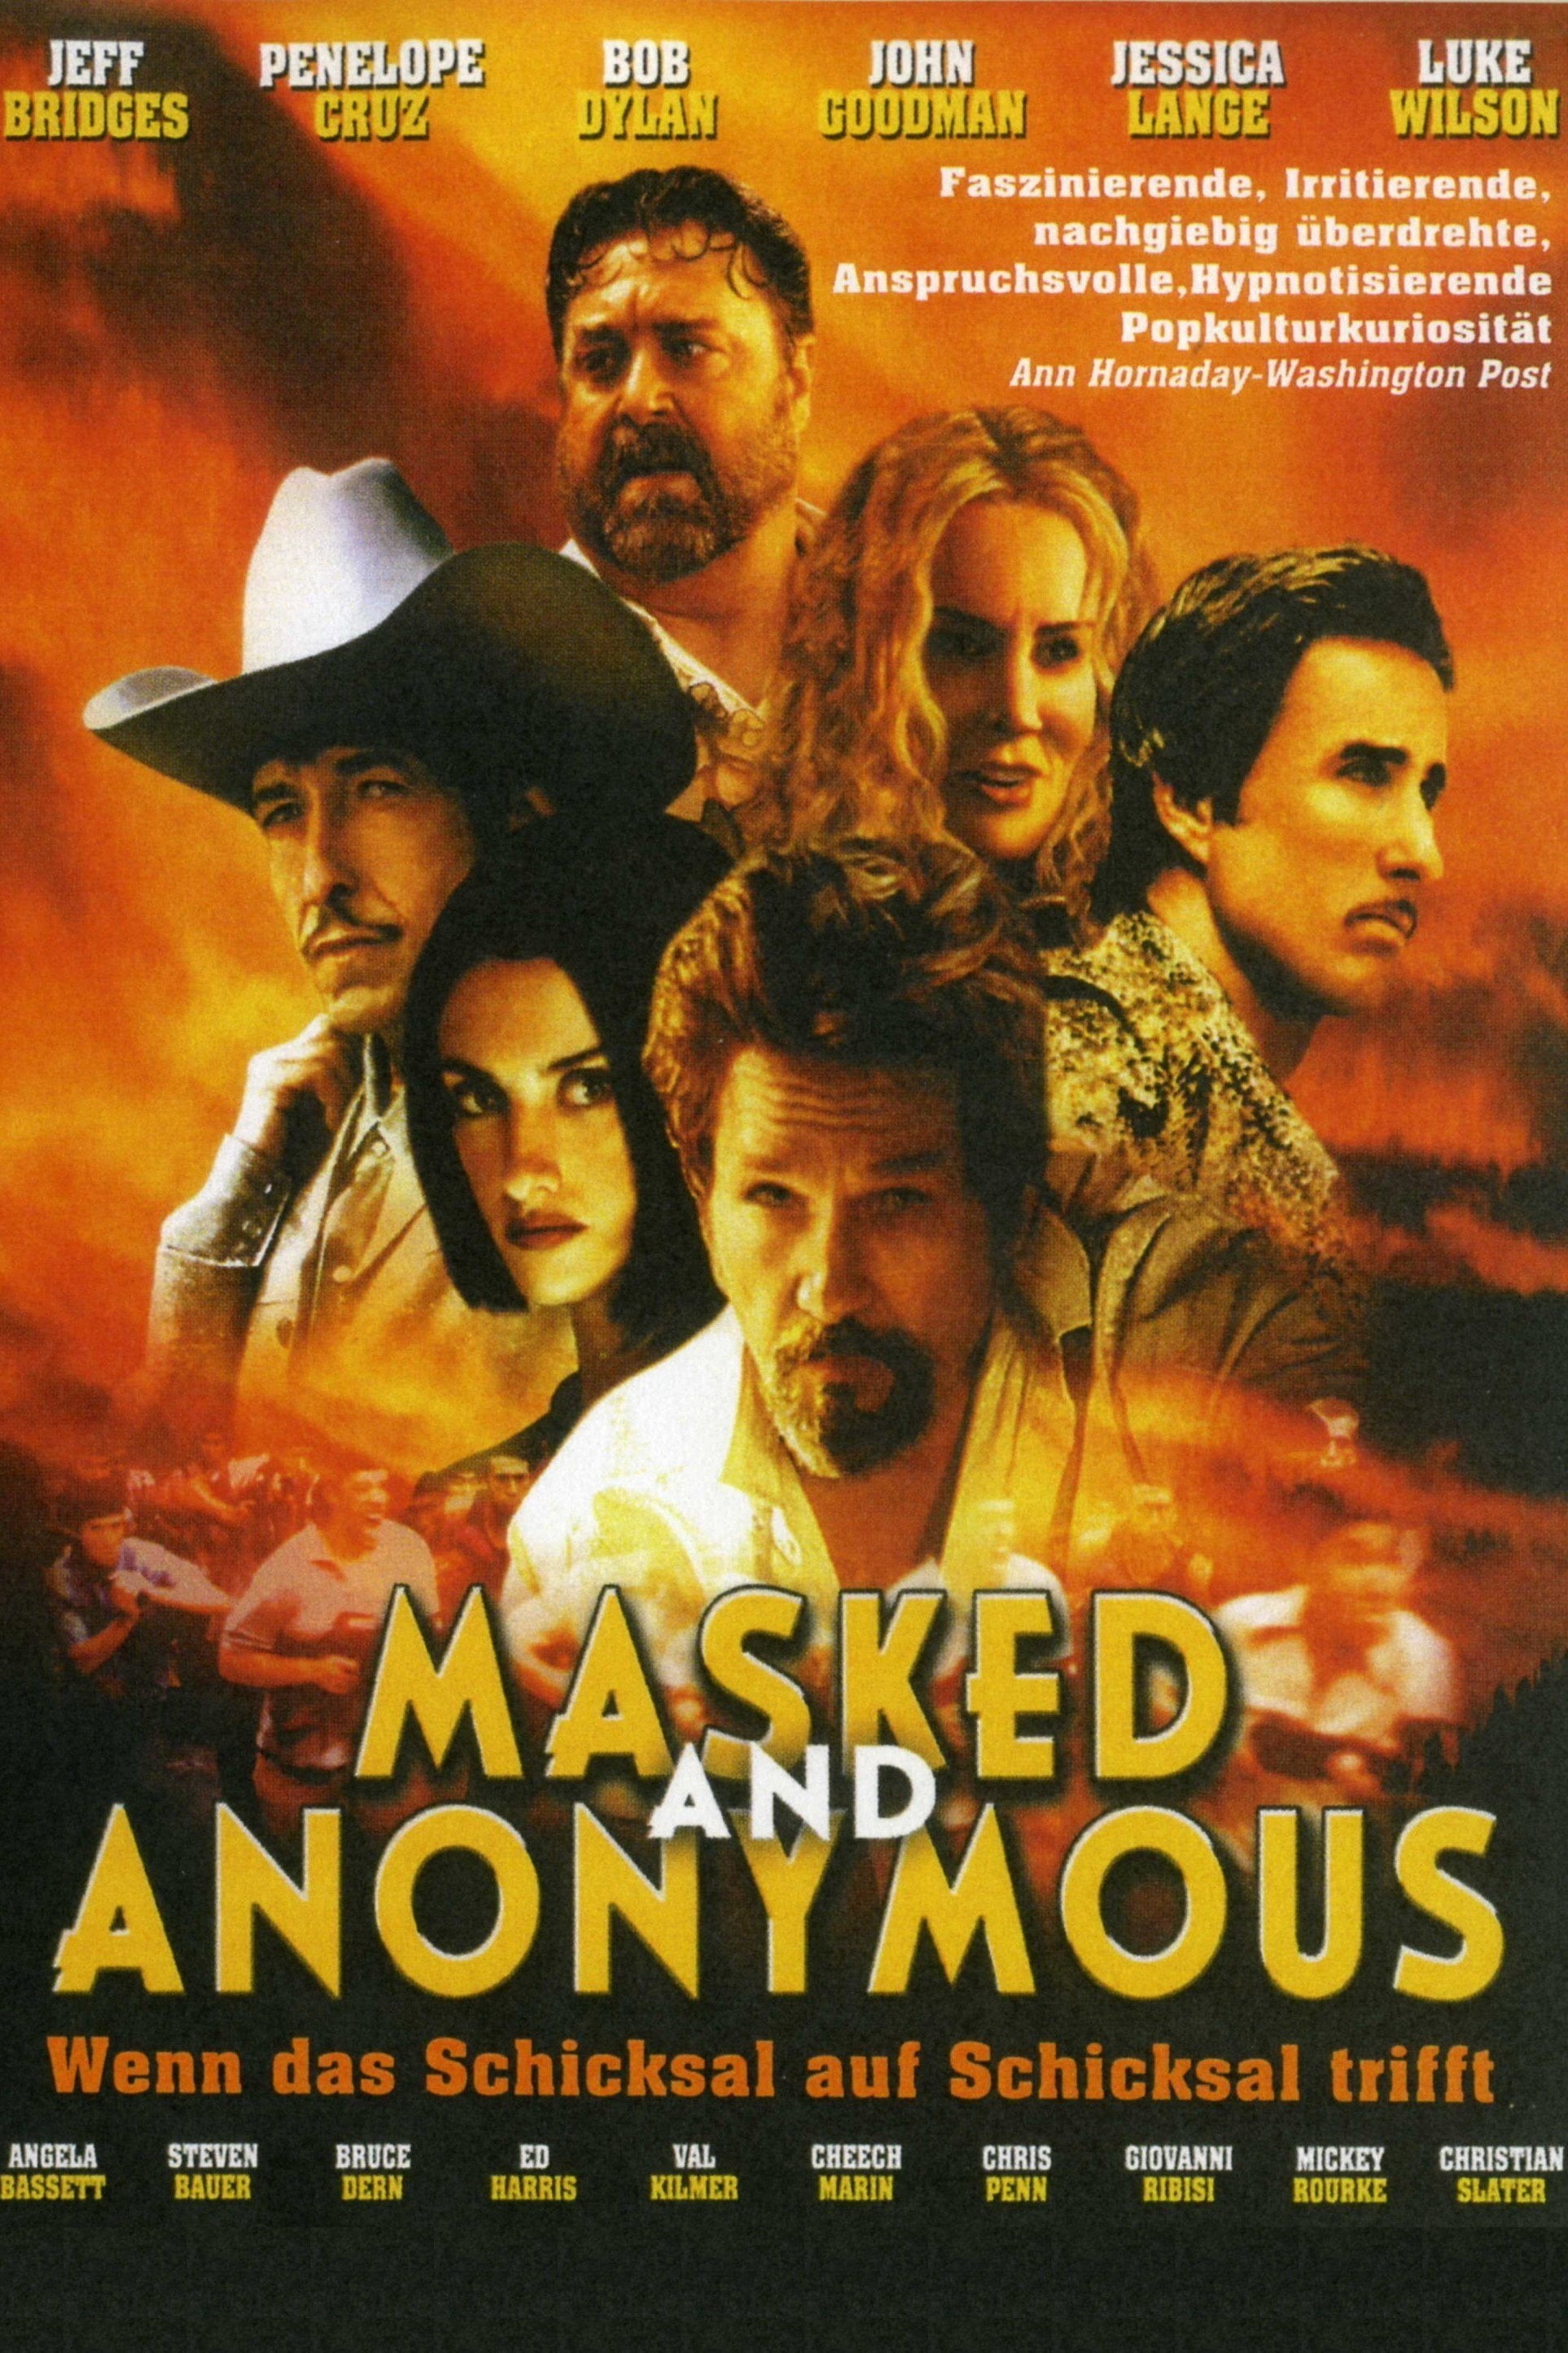 Plakat von "Masked and Anonymous"